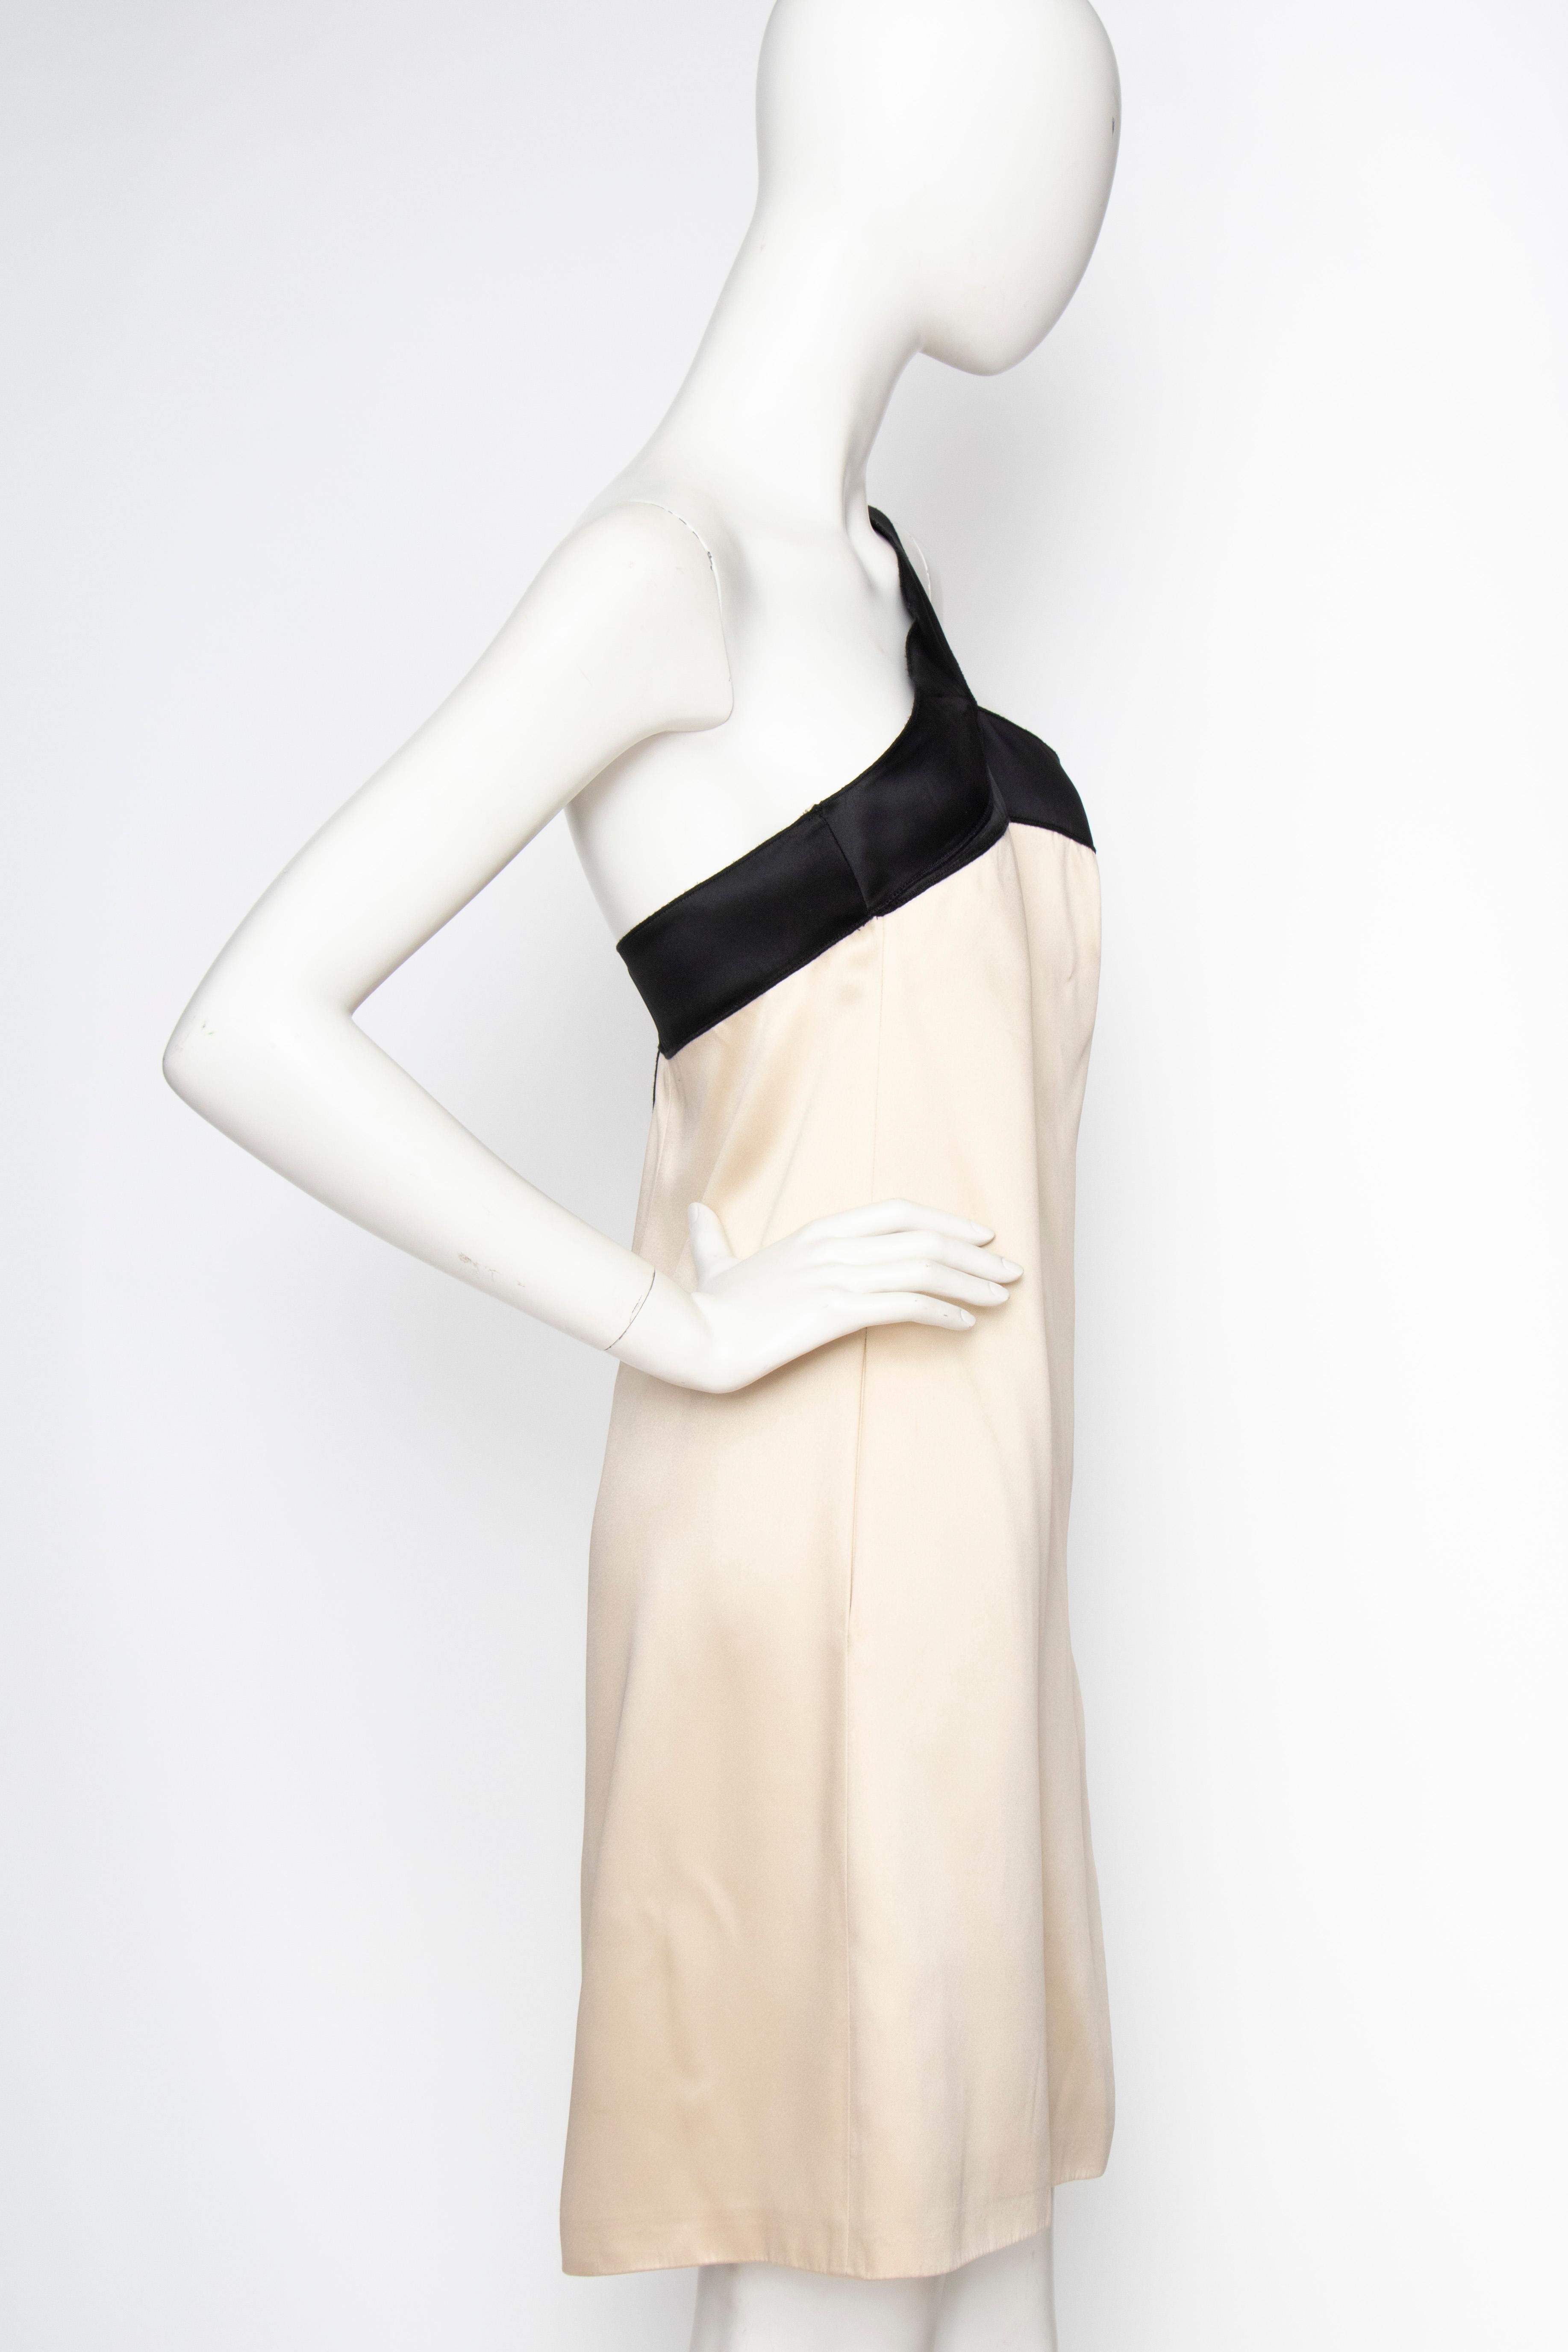 Beige An Early 2000s Vintage D&G by Dolce & Gabbana Ivory Satin Cocktail Dress For Sale